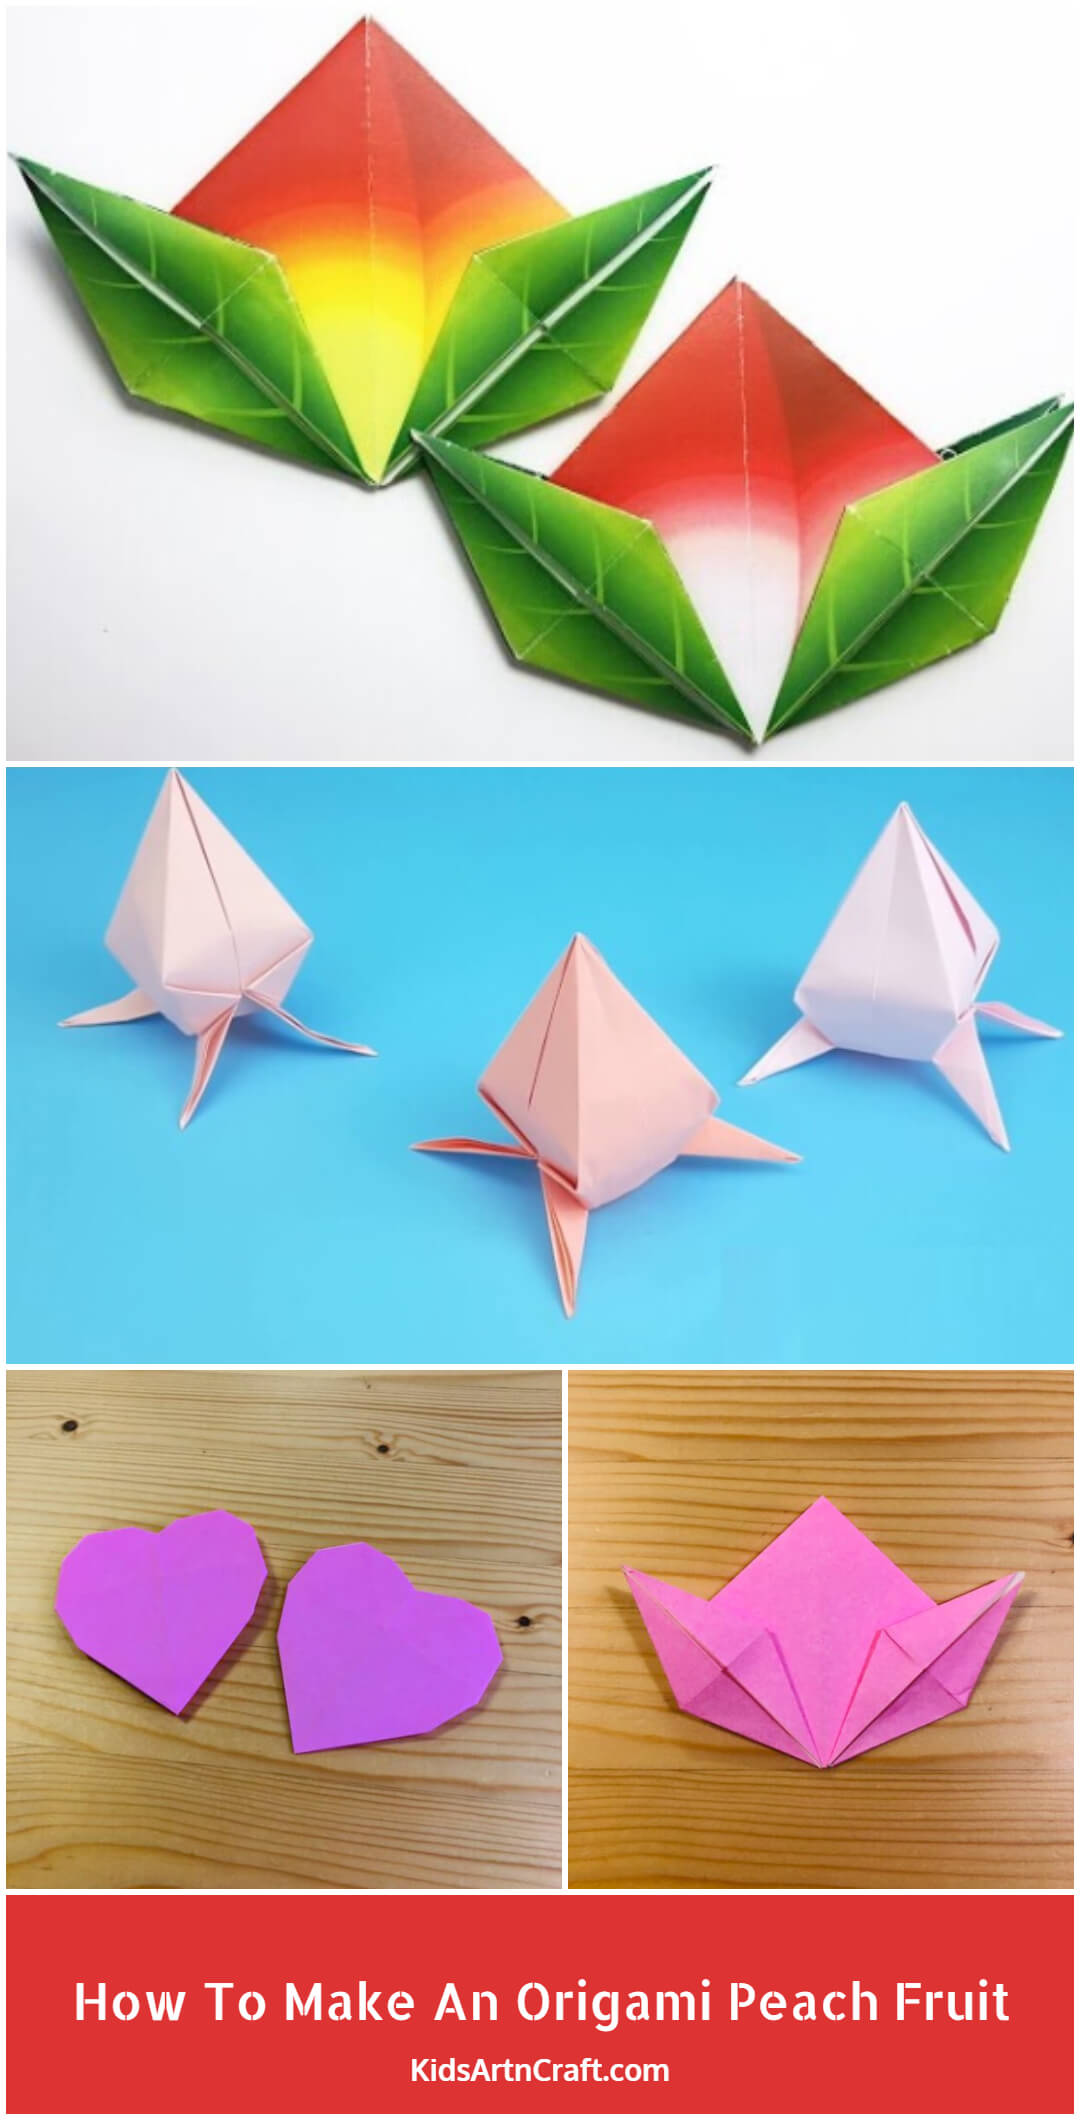 How To Make An Origami Peach Fruit With Kids